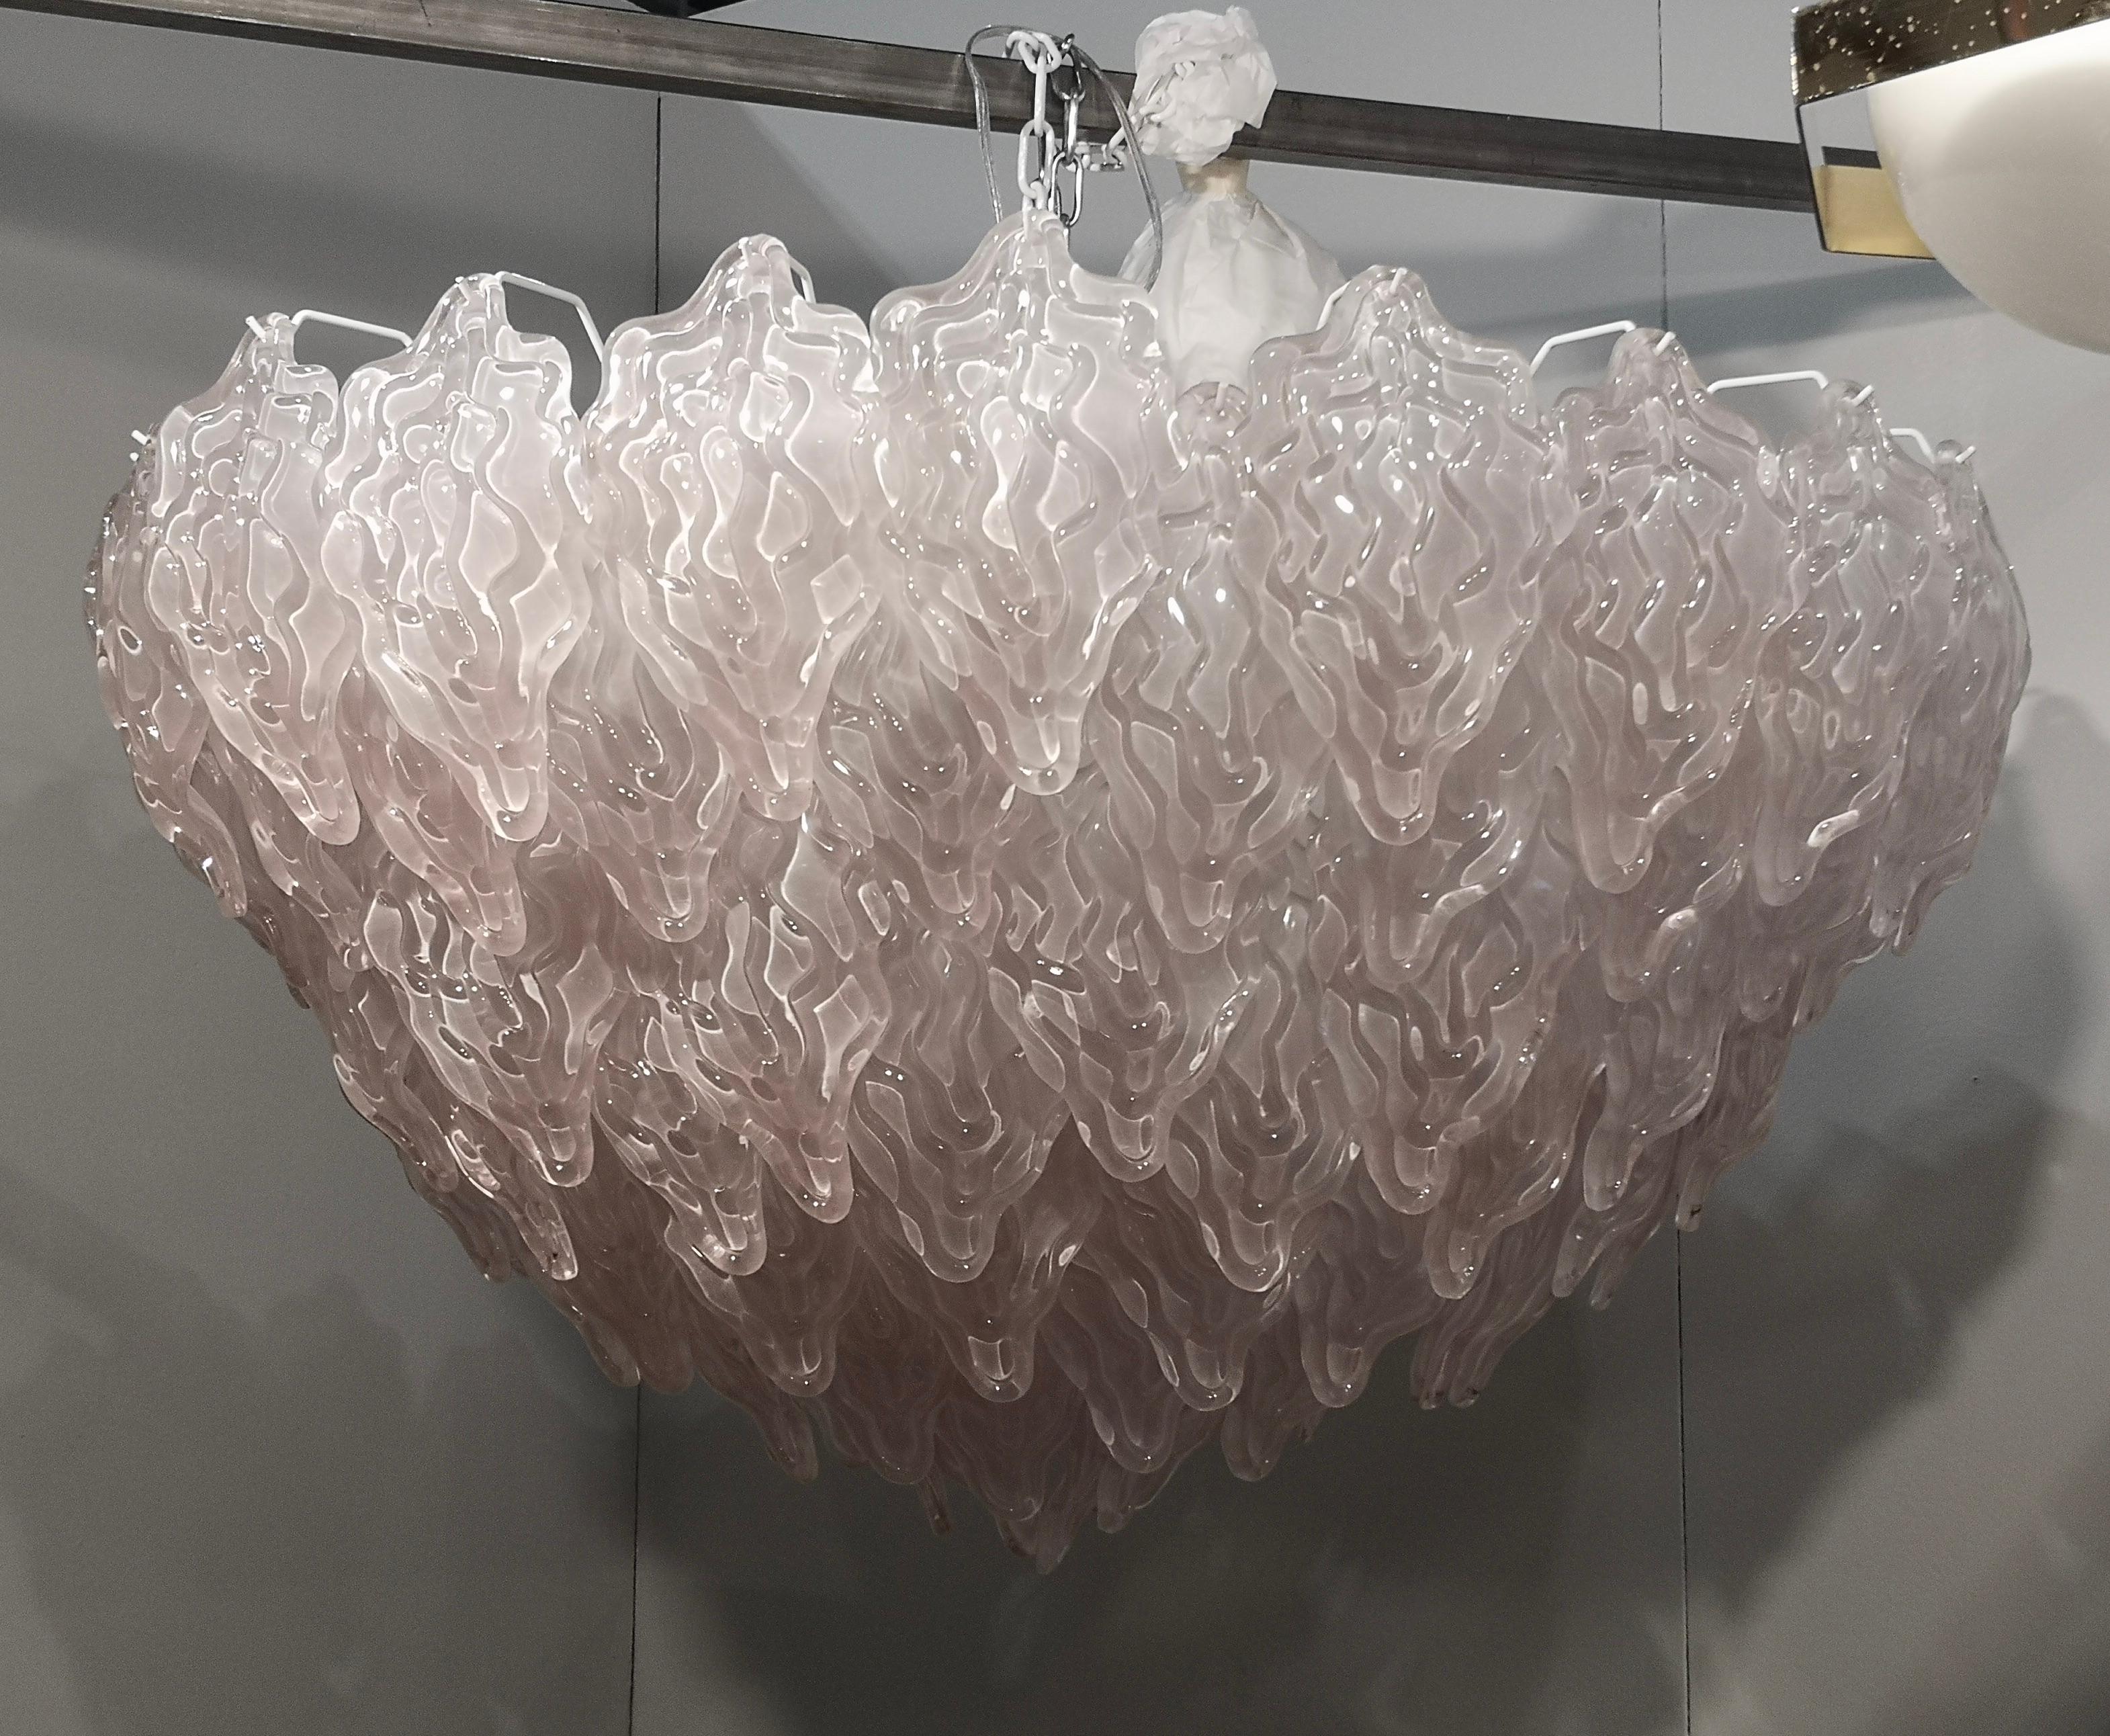 Fantastic Venetian light pink color for a Cascade of Murano leaves. A striking color for this chandelier.

All in Murano art glass with light pink leaves placed all around. The color of this very Classic Murano chandelier is very light pink. Its